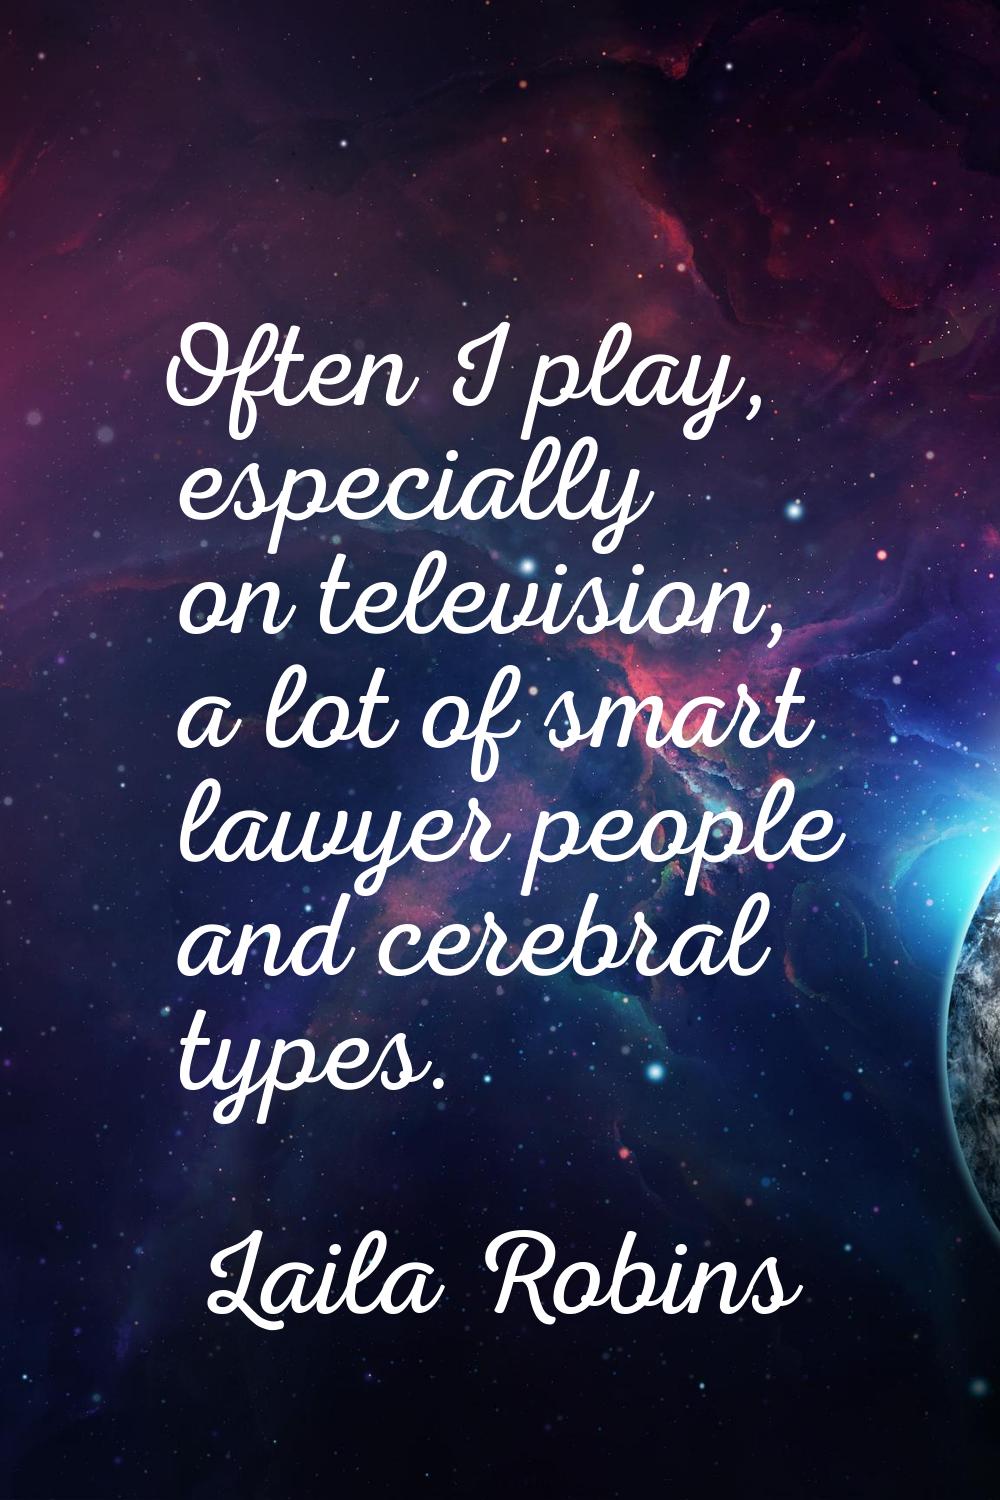 Often I play, especially on television, a lot of smart lawyer people and cerebral types.